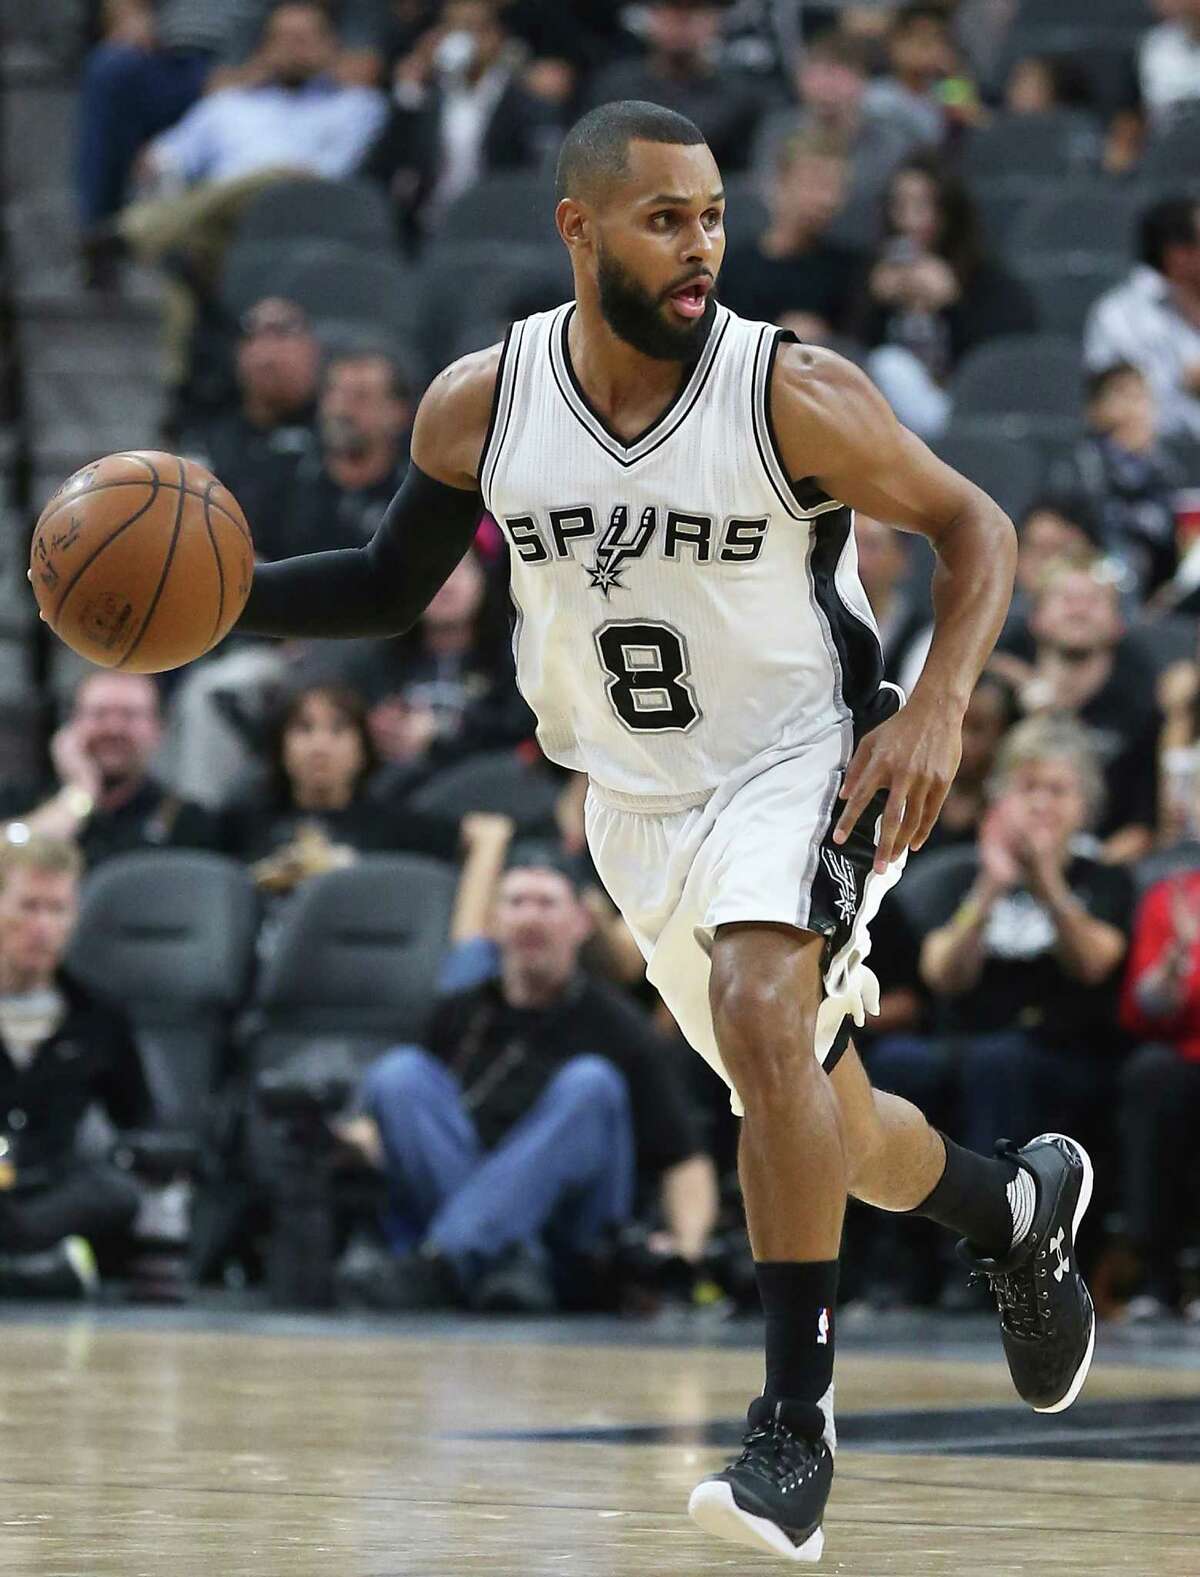 Patty Mills brings the ball up court as the Spurs host the Pistons at the AT&T Center on March 2, 2016.